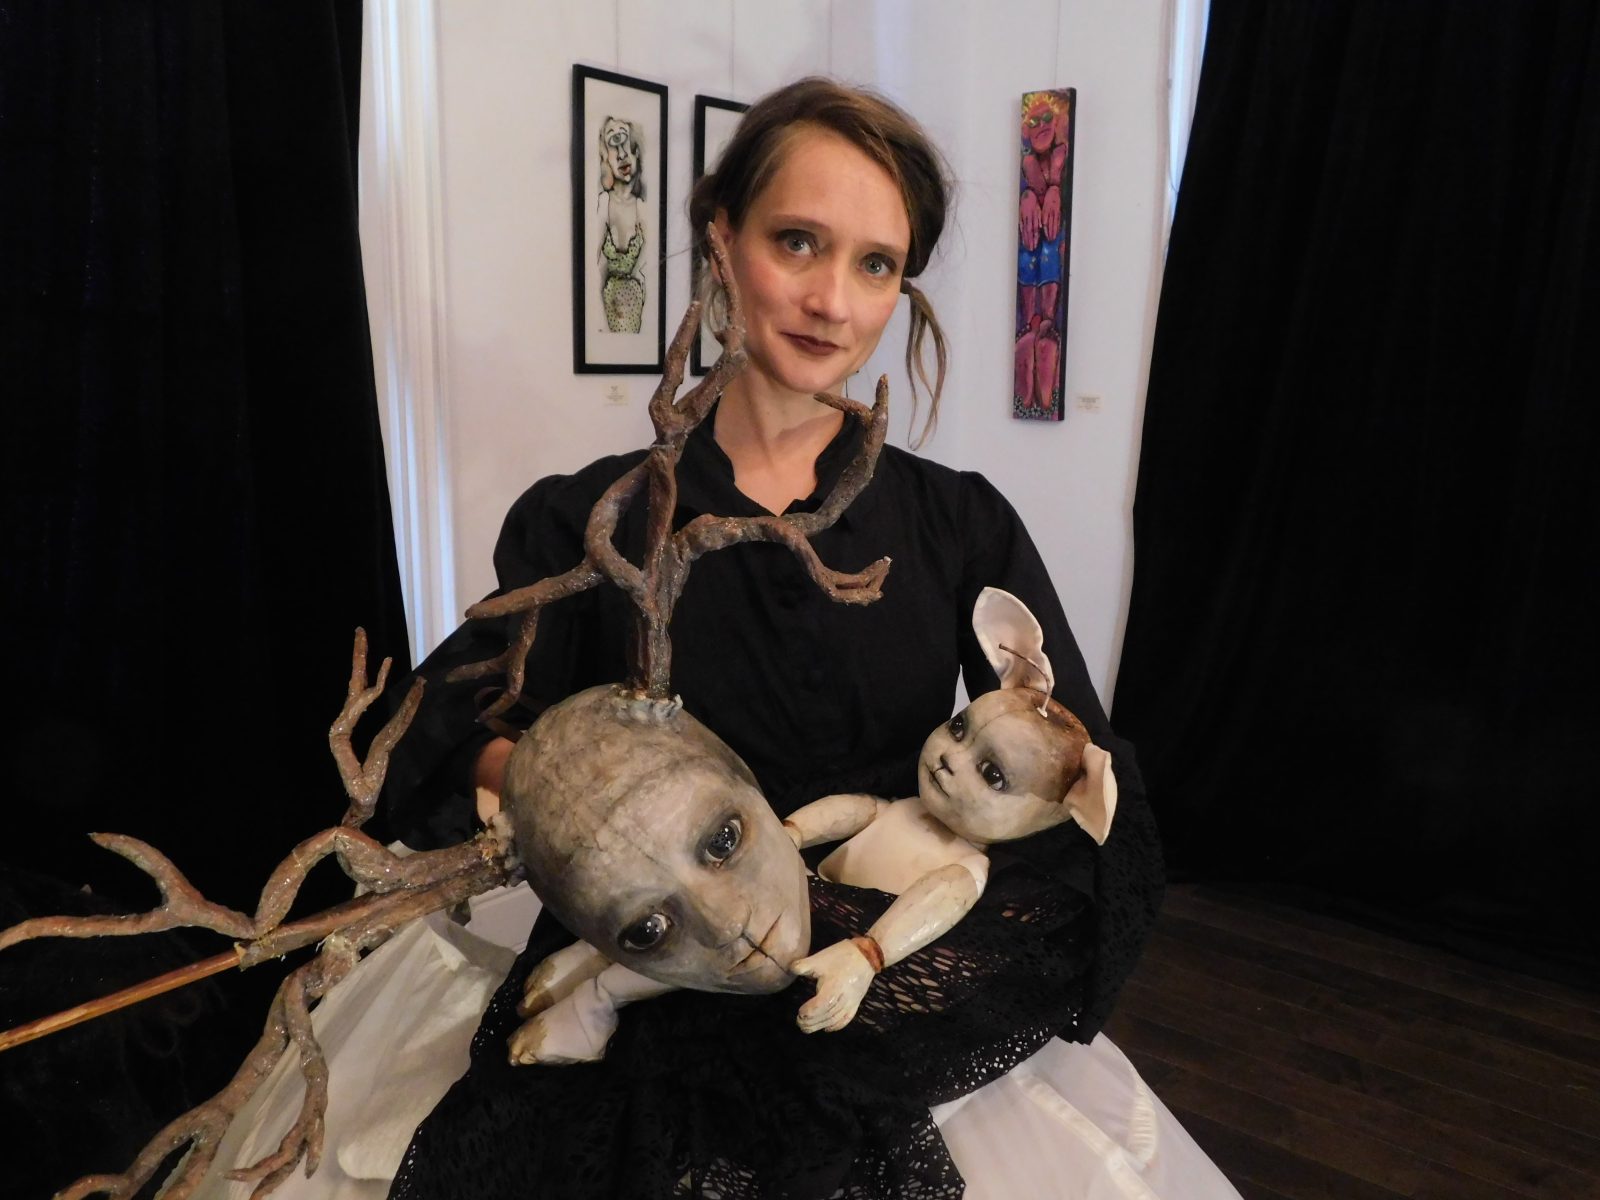 Julie Desrosiers stretches the boundaries of the puppeteer’s art